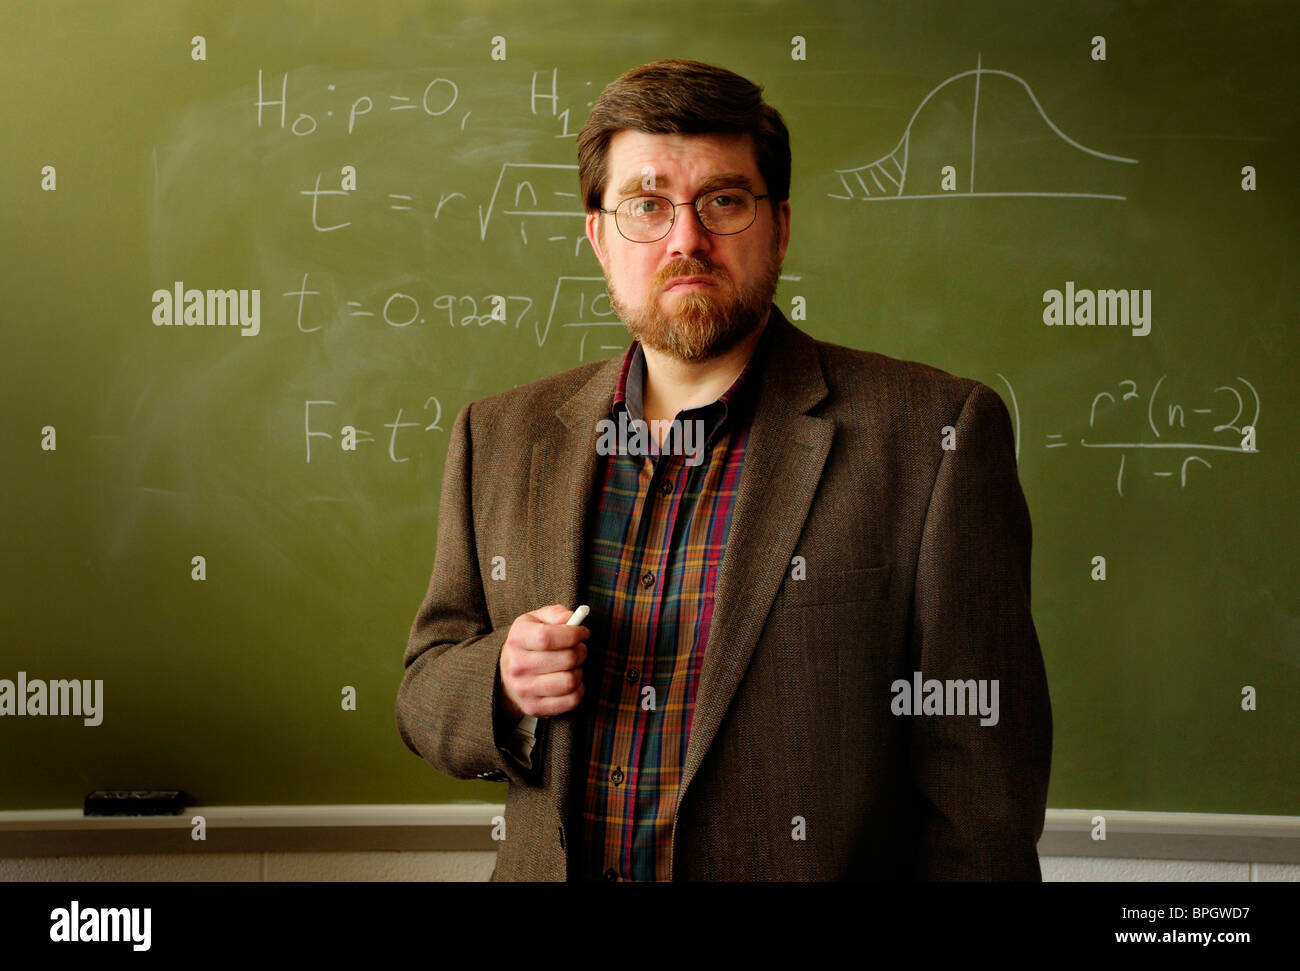 Math professor or teacher standing in a classroom, Statistical formula on green chalkboard in background. Stock Photo